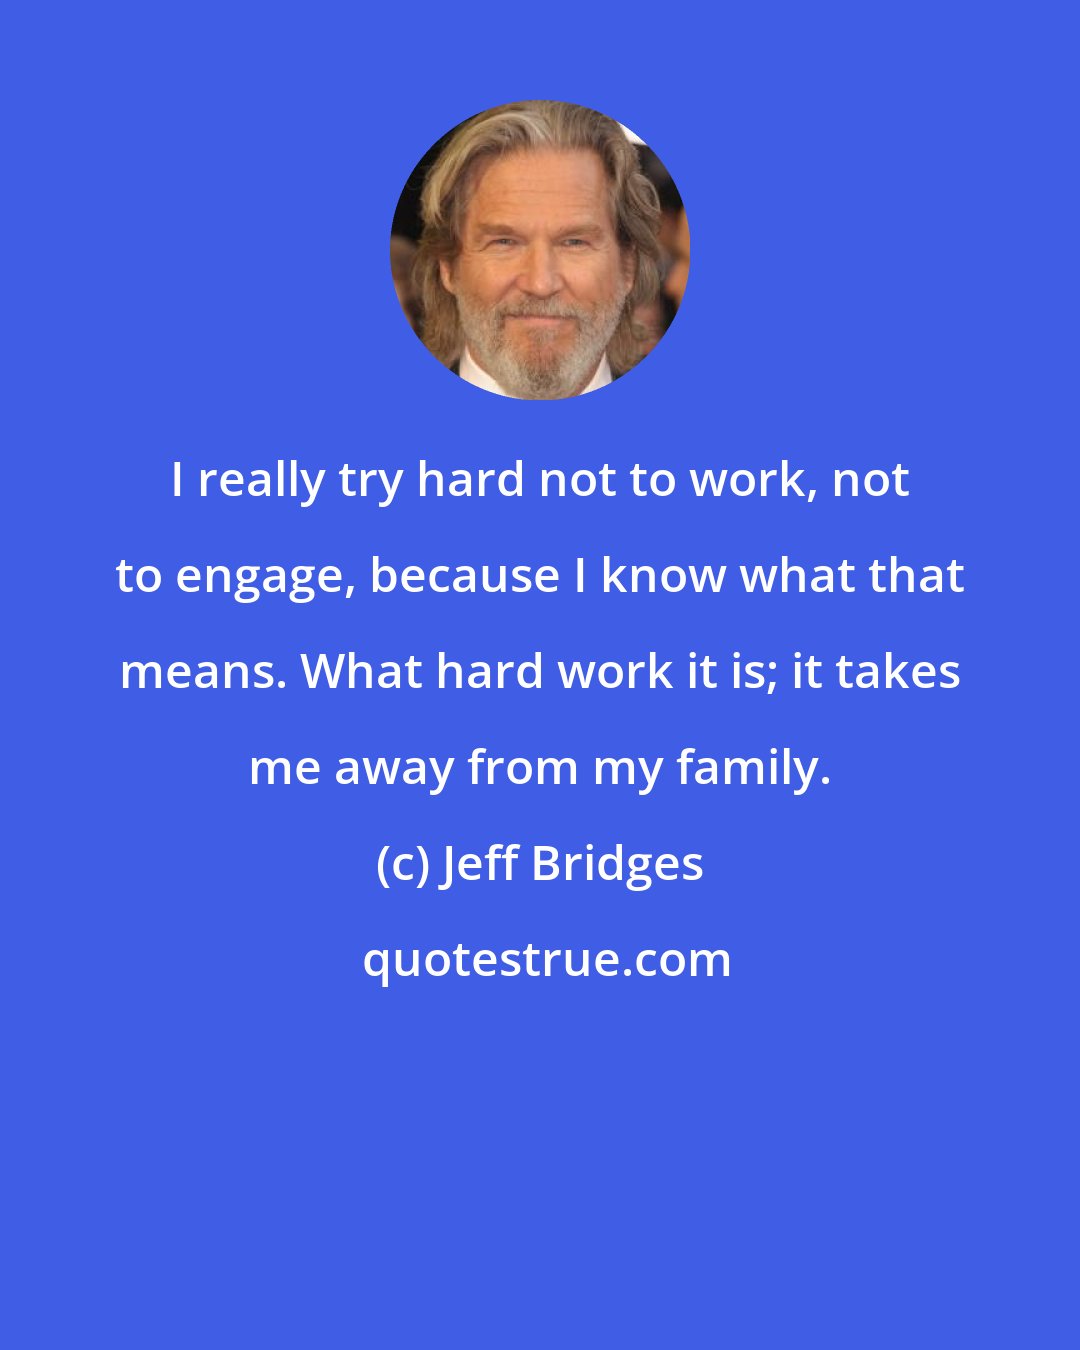 Jeff Bridges: I really try hard not to work, not to engage, because I know what that means. What hard work it is; it takes me away from my family.